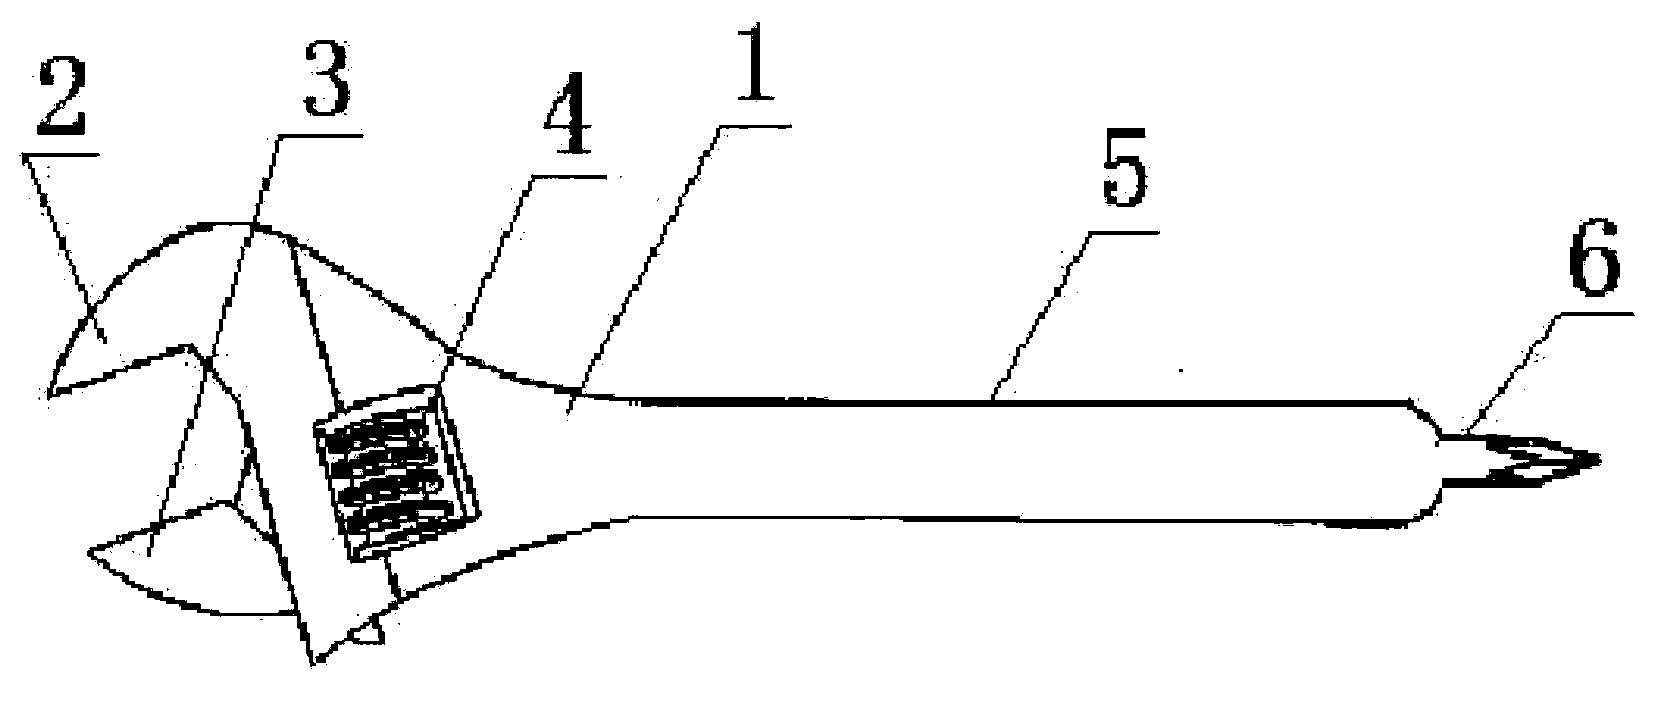 Spanner structure with cross-shaped tool bit